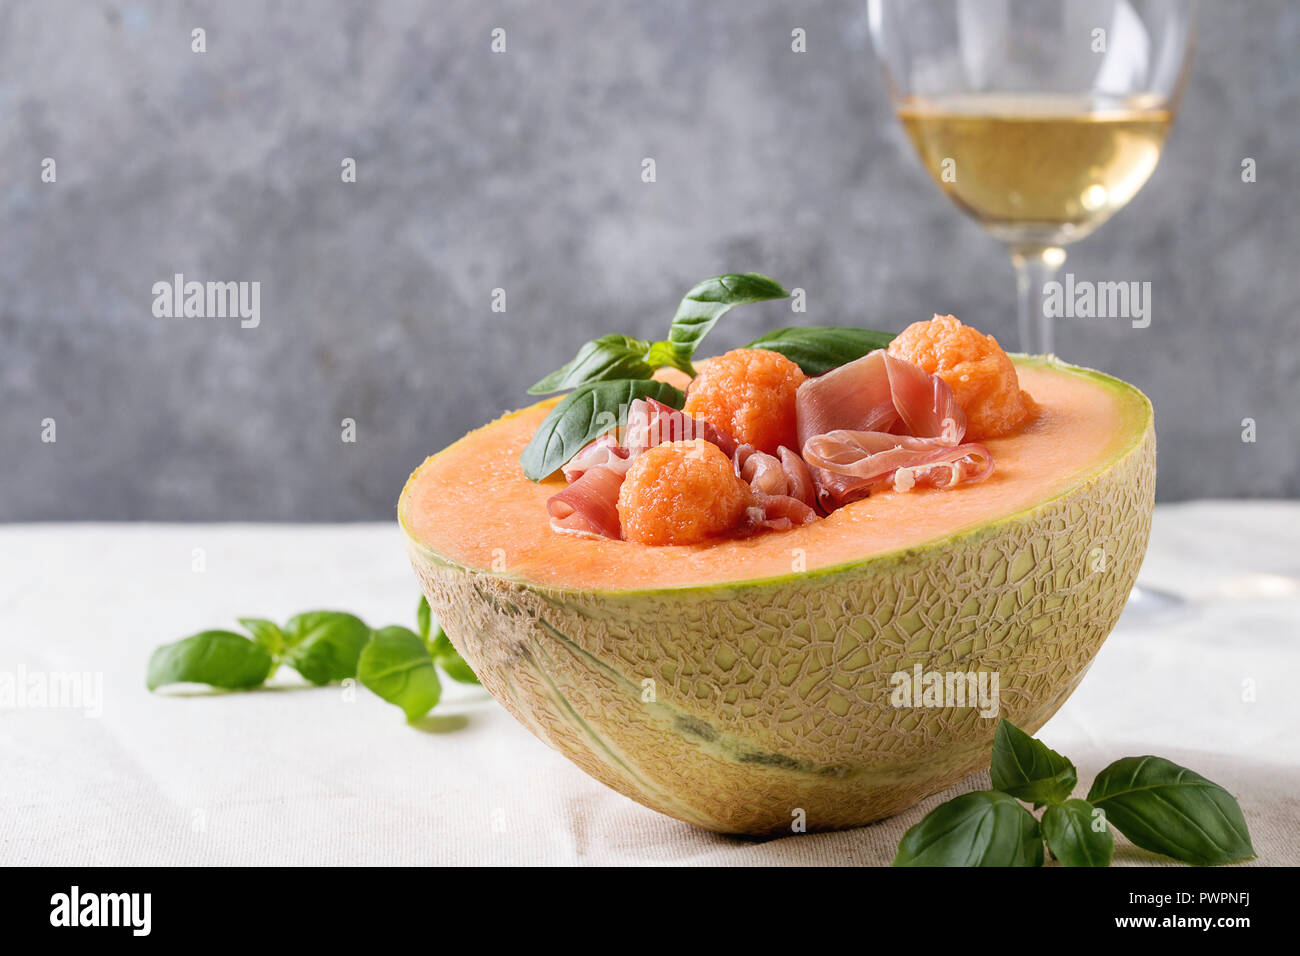 Melon and ham or prosciutto salad served in half of Cantaloupe melon, decorated by fresh basil standing on white tablecloth with glass of white wine. Stock Photo